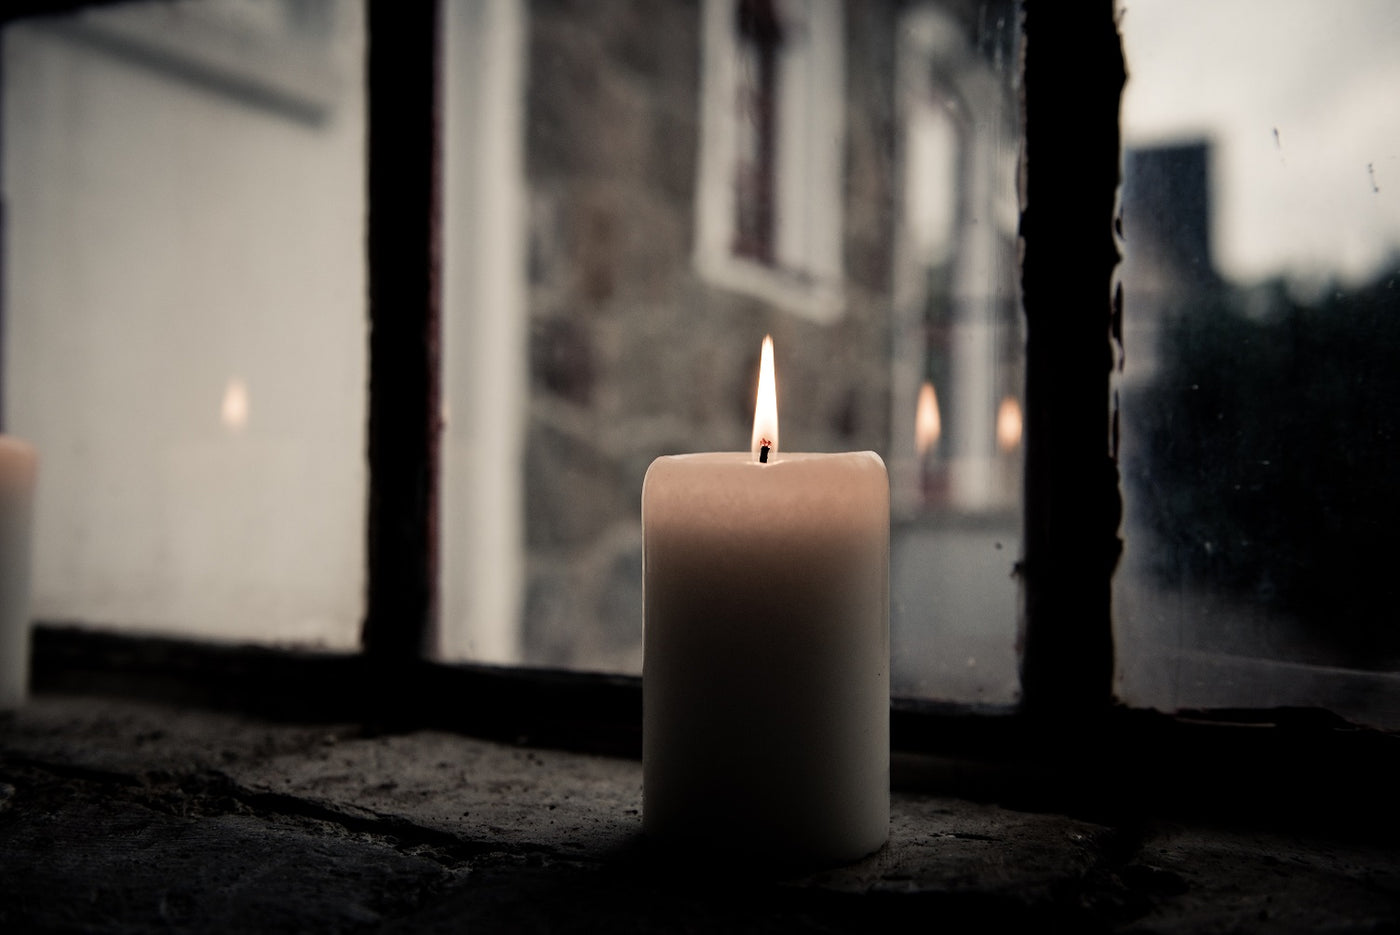 The candle behind the window